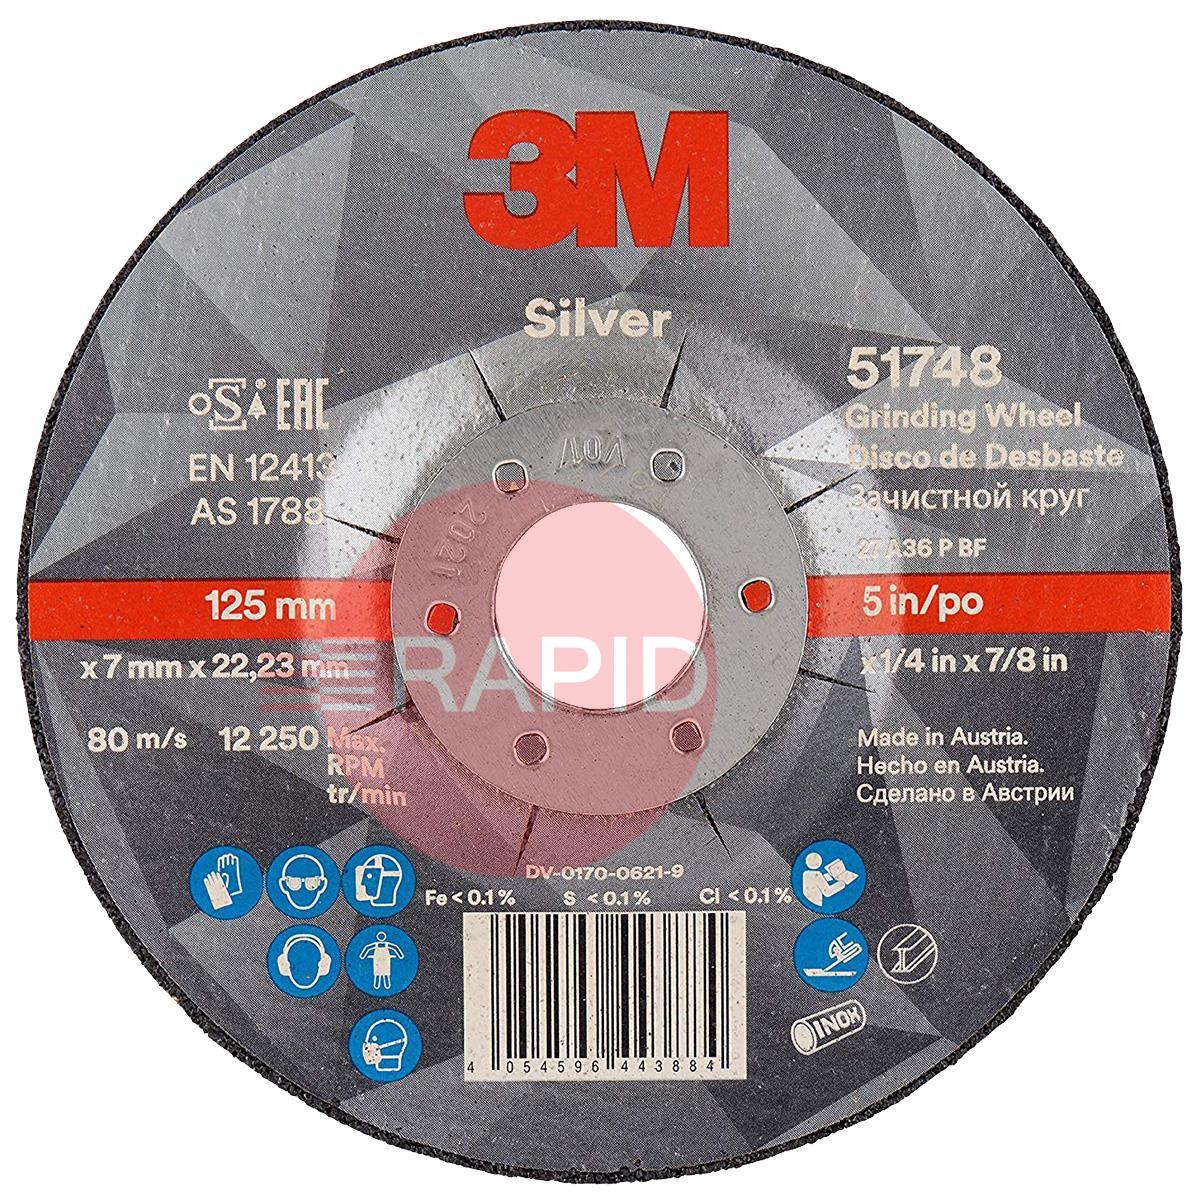 3M-51748  3M Silver Depressed Centre Grinding Wheel 125mm x 7mm x 22.23mm (Box of 10)